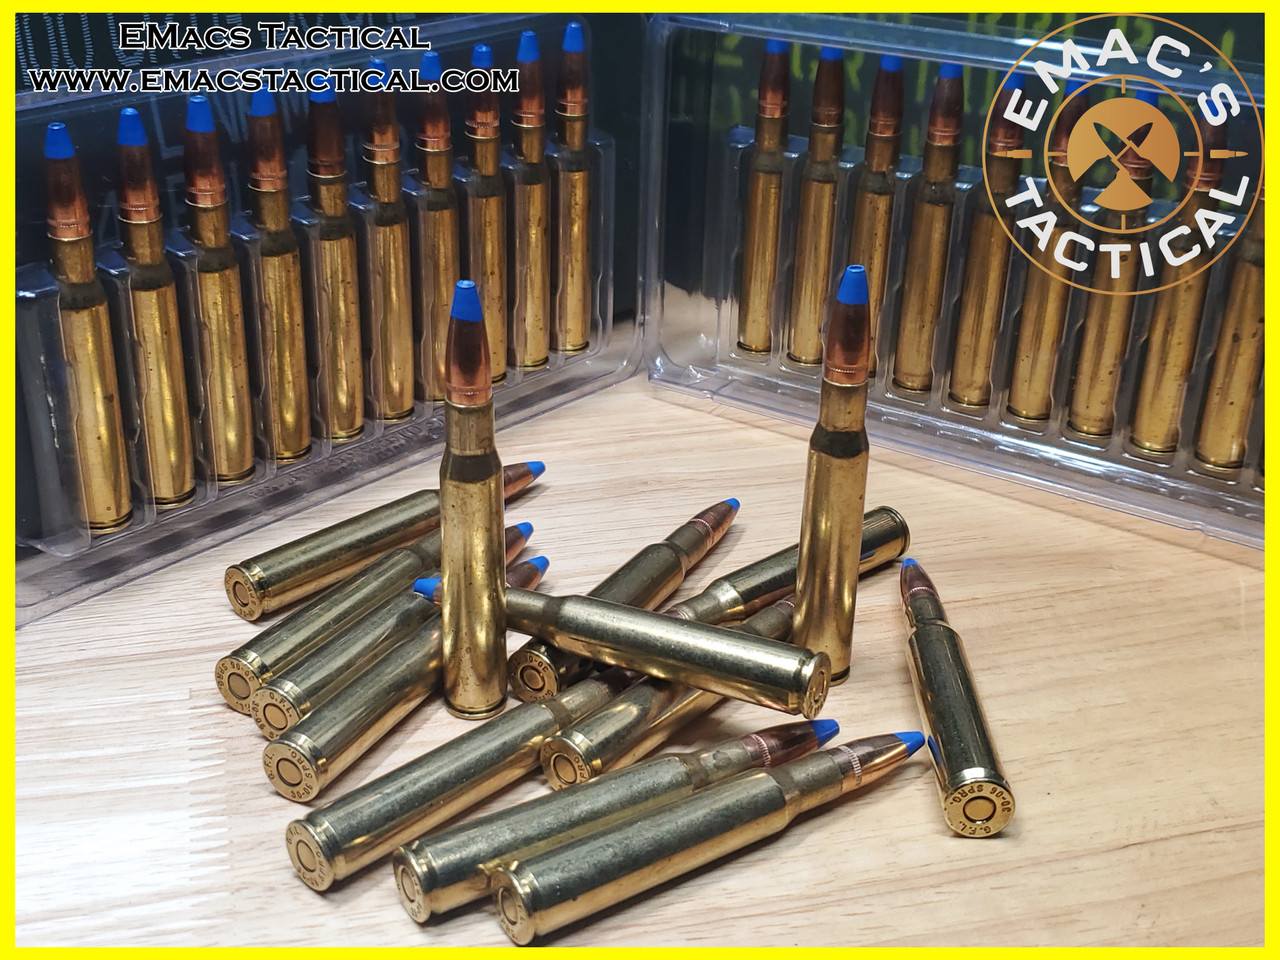 30-06/3006 Heavy Incendiary Blue Tip Ammunition [10 Count]